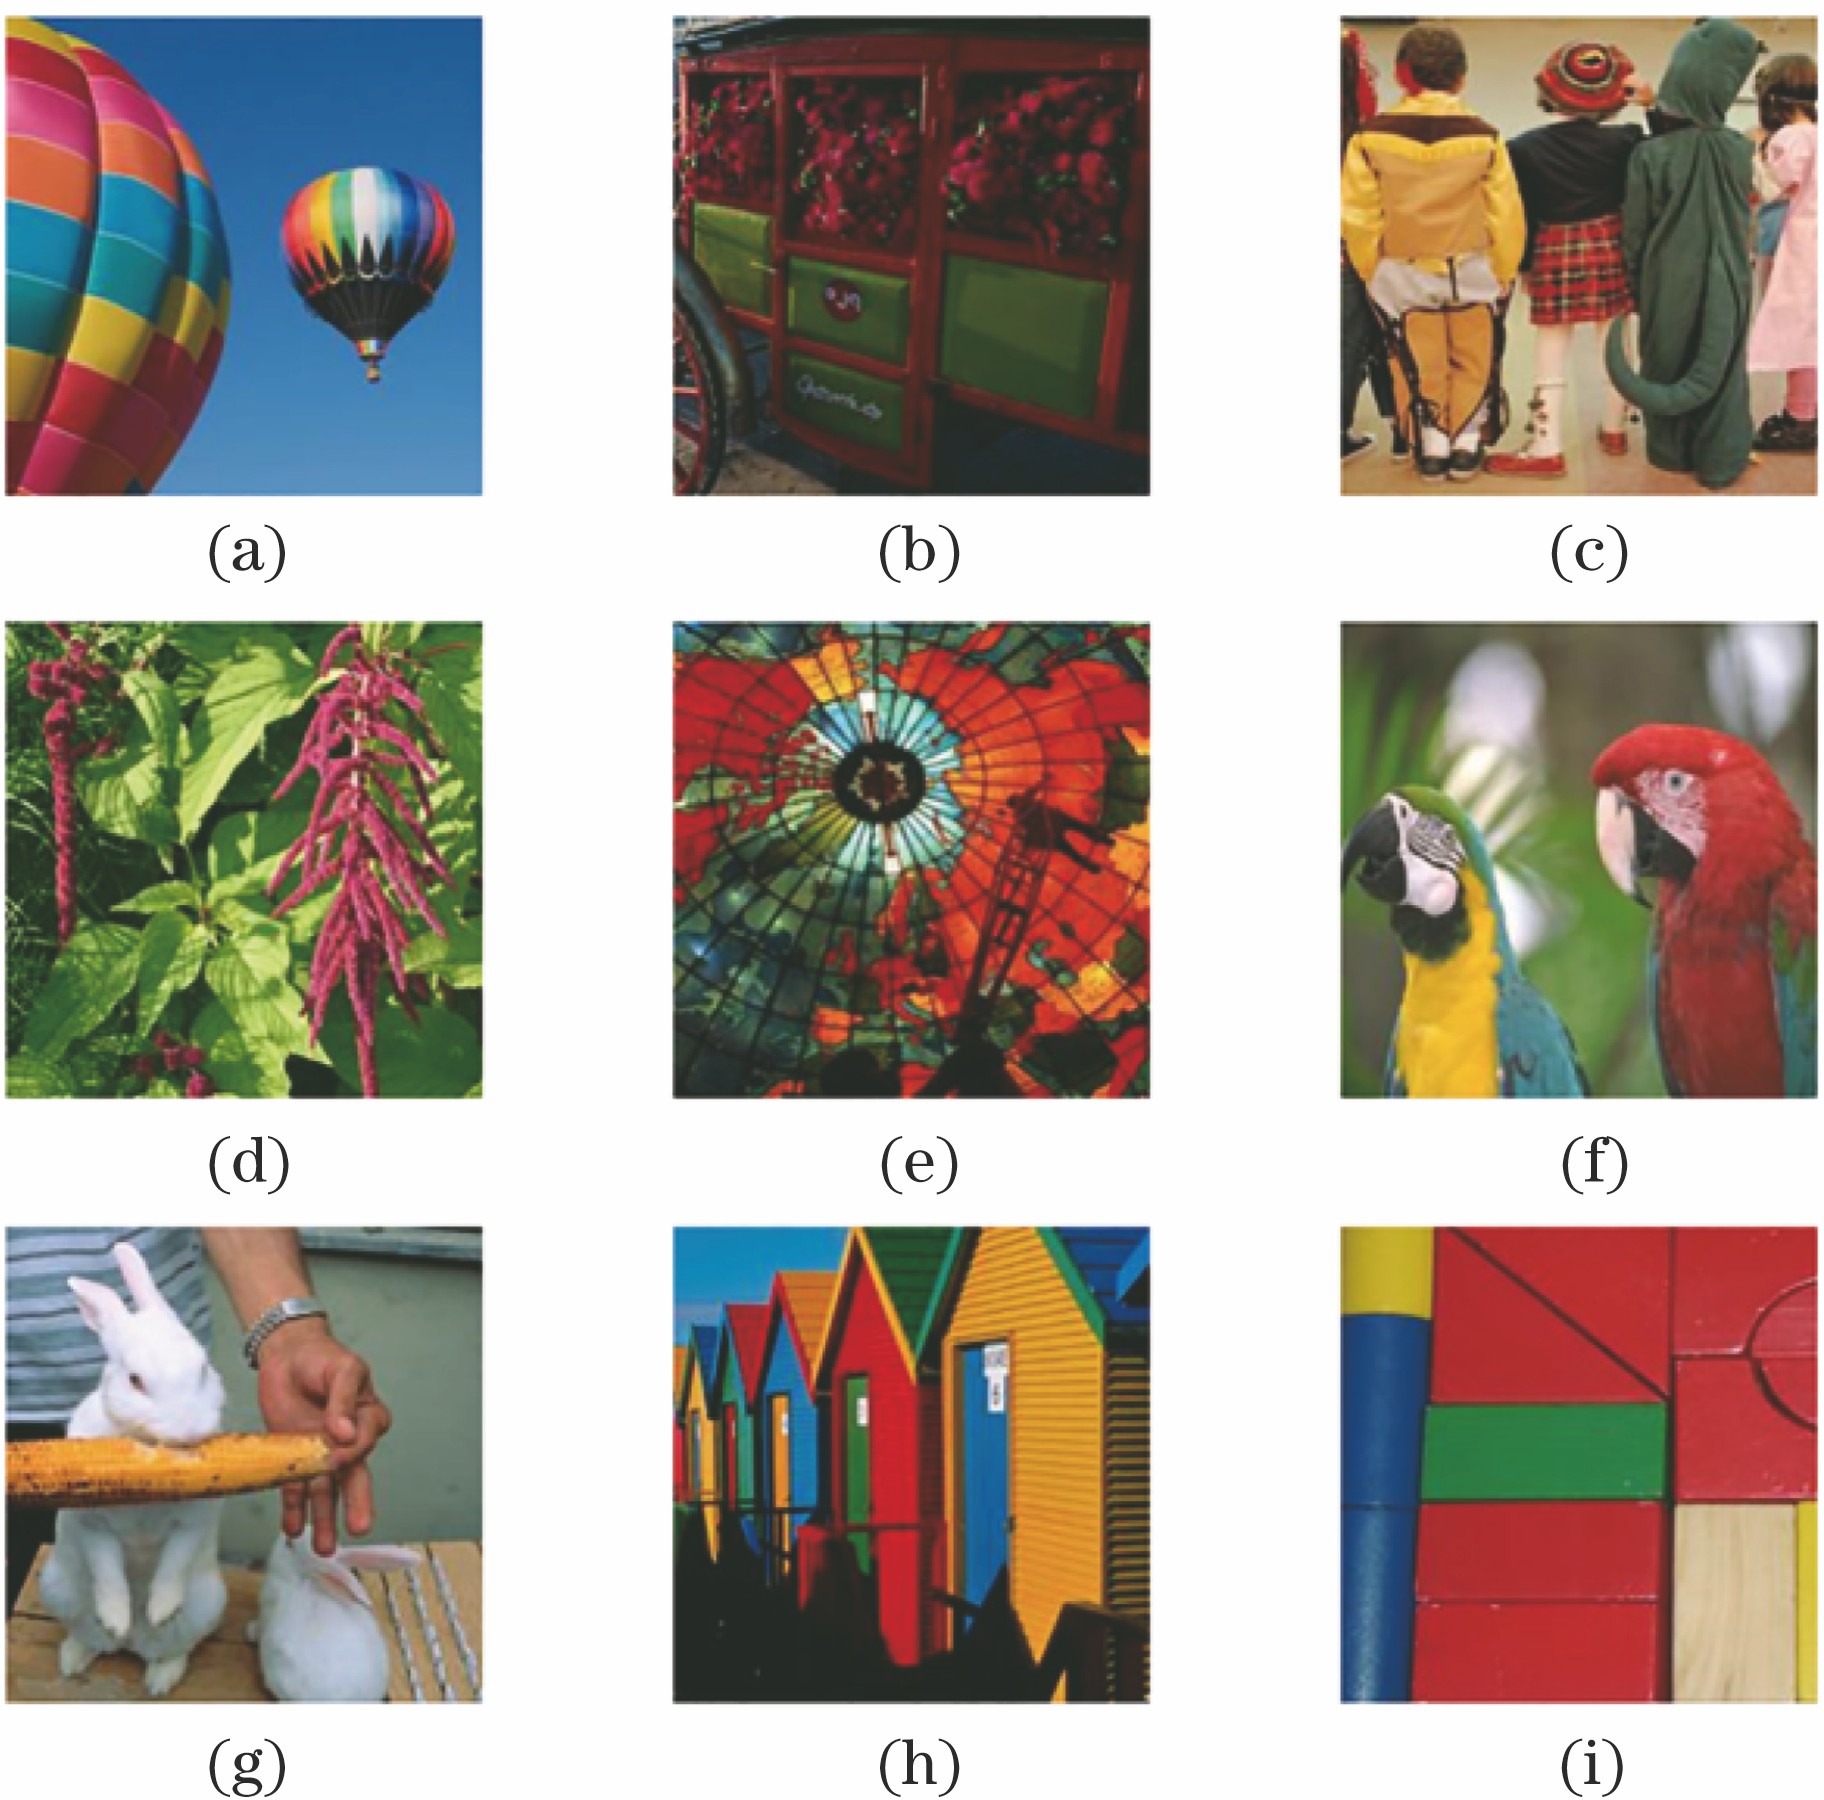 Test images of JND for CR. (a) Balloon; (b) carriage; (c) children; (d) plant; (e) globe; (f) parrot; (g) rabbit; (h) house; (i) toy block